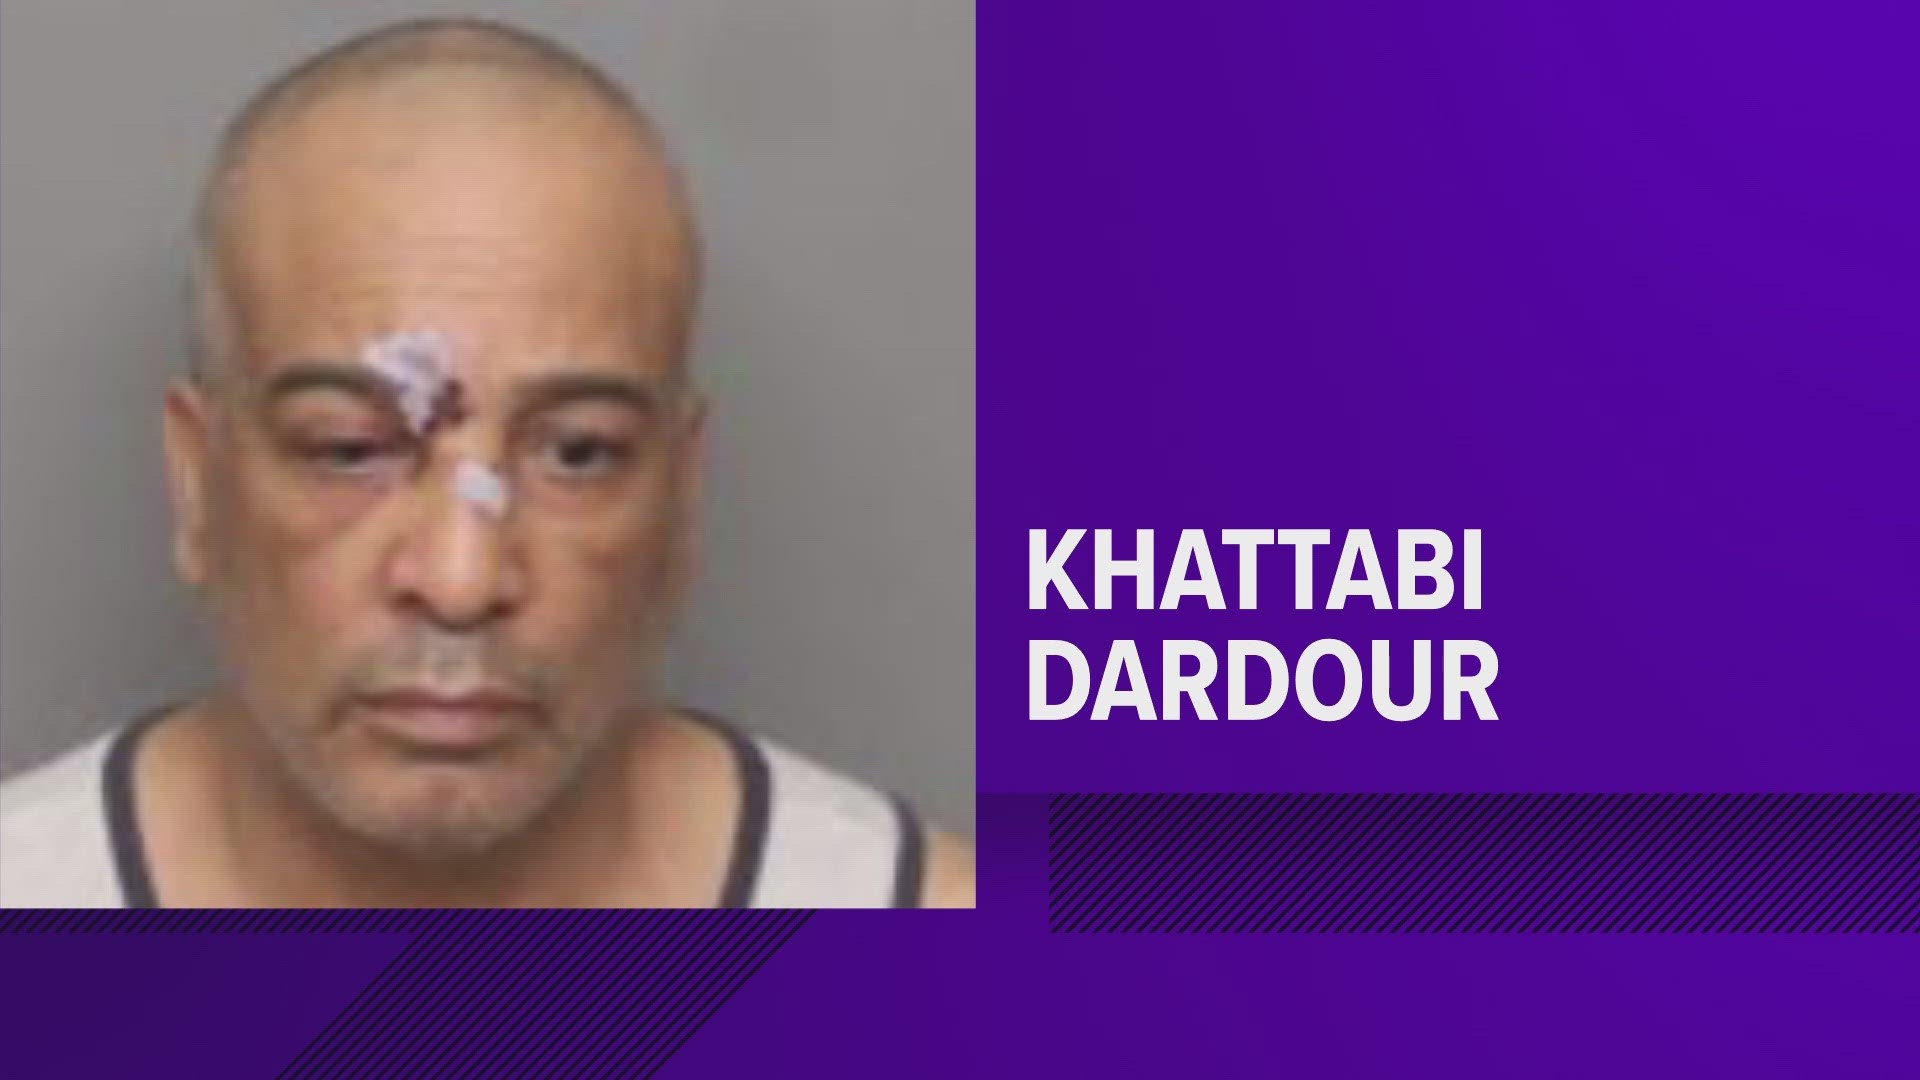 Khattabi Dardour is now charged with DUI, public intoxication, reckless driving, leaving the scene of an accident, and financial responsibility.